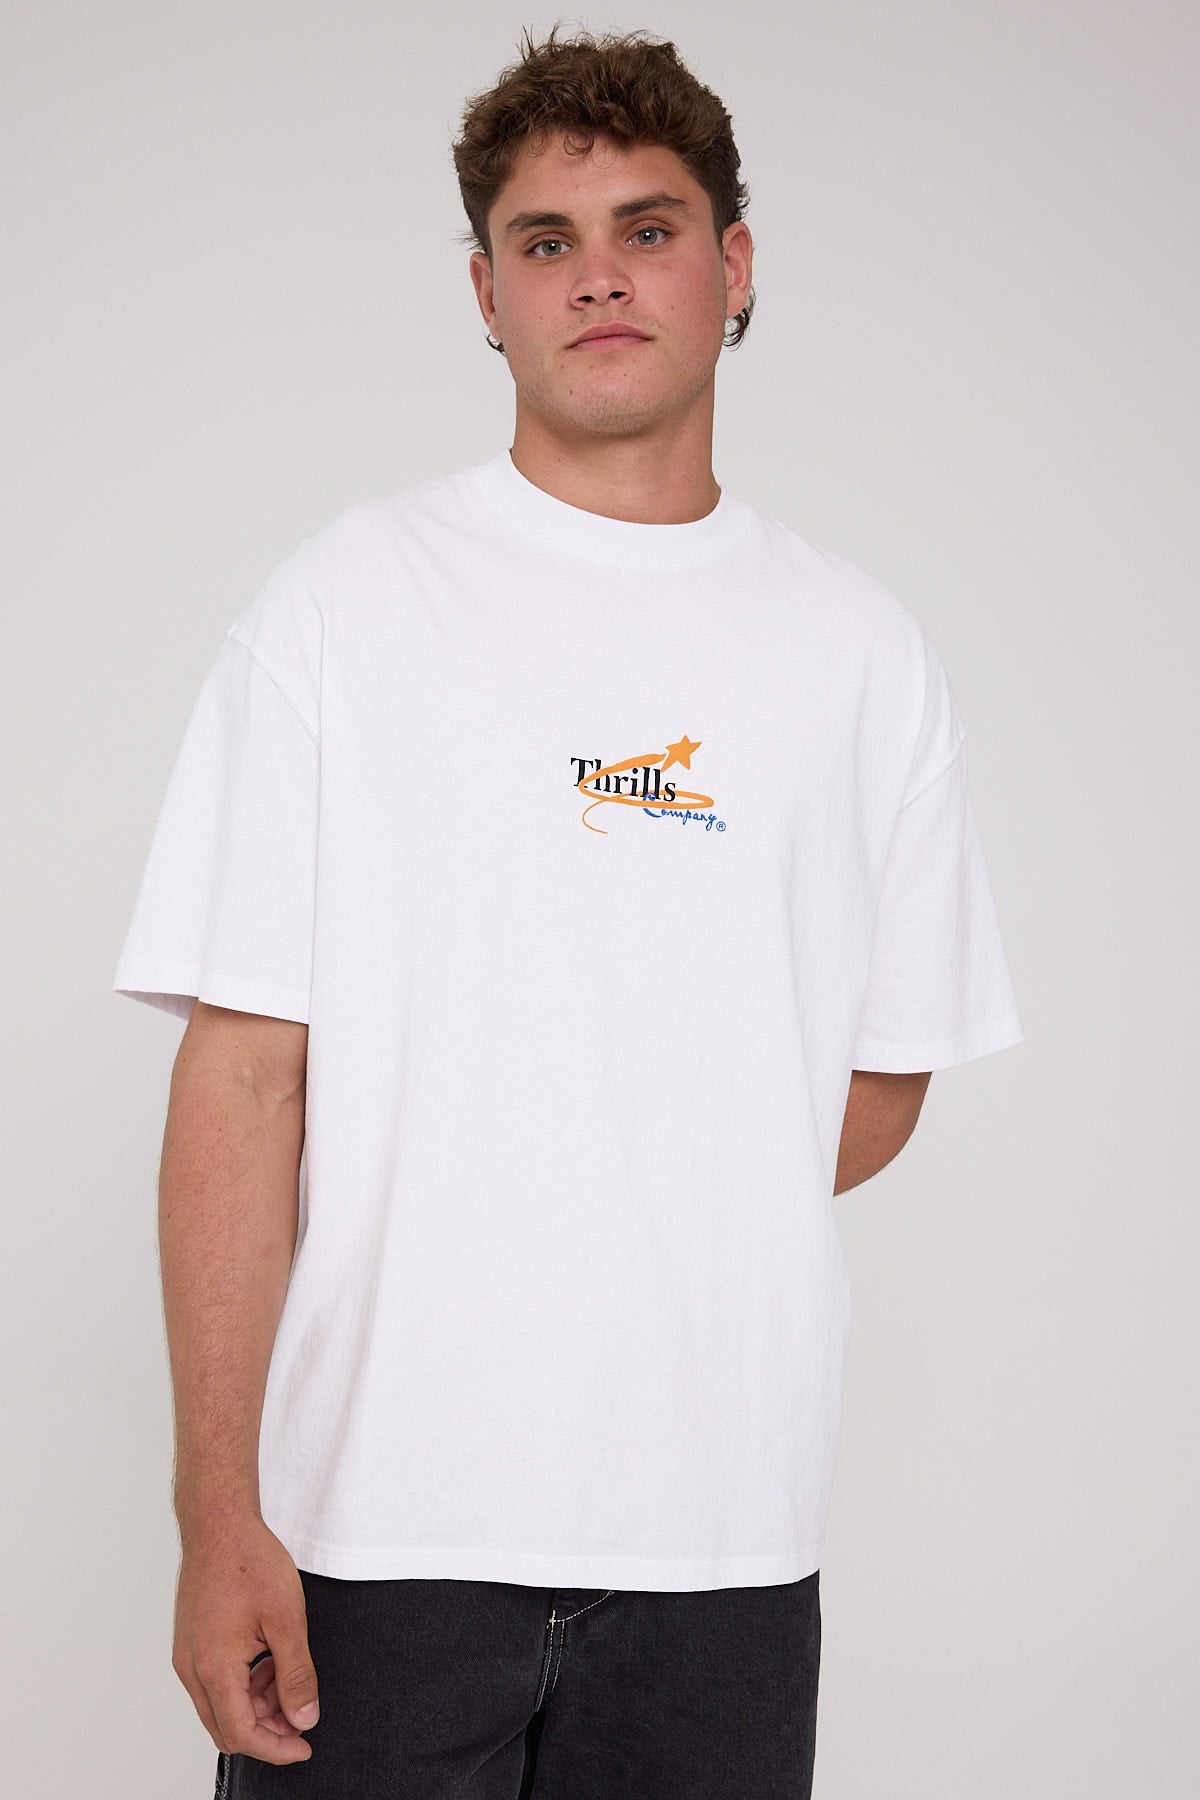 Thrills Earthdrone Box Fit Oversize Tee White White – Universal Store